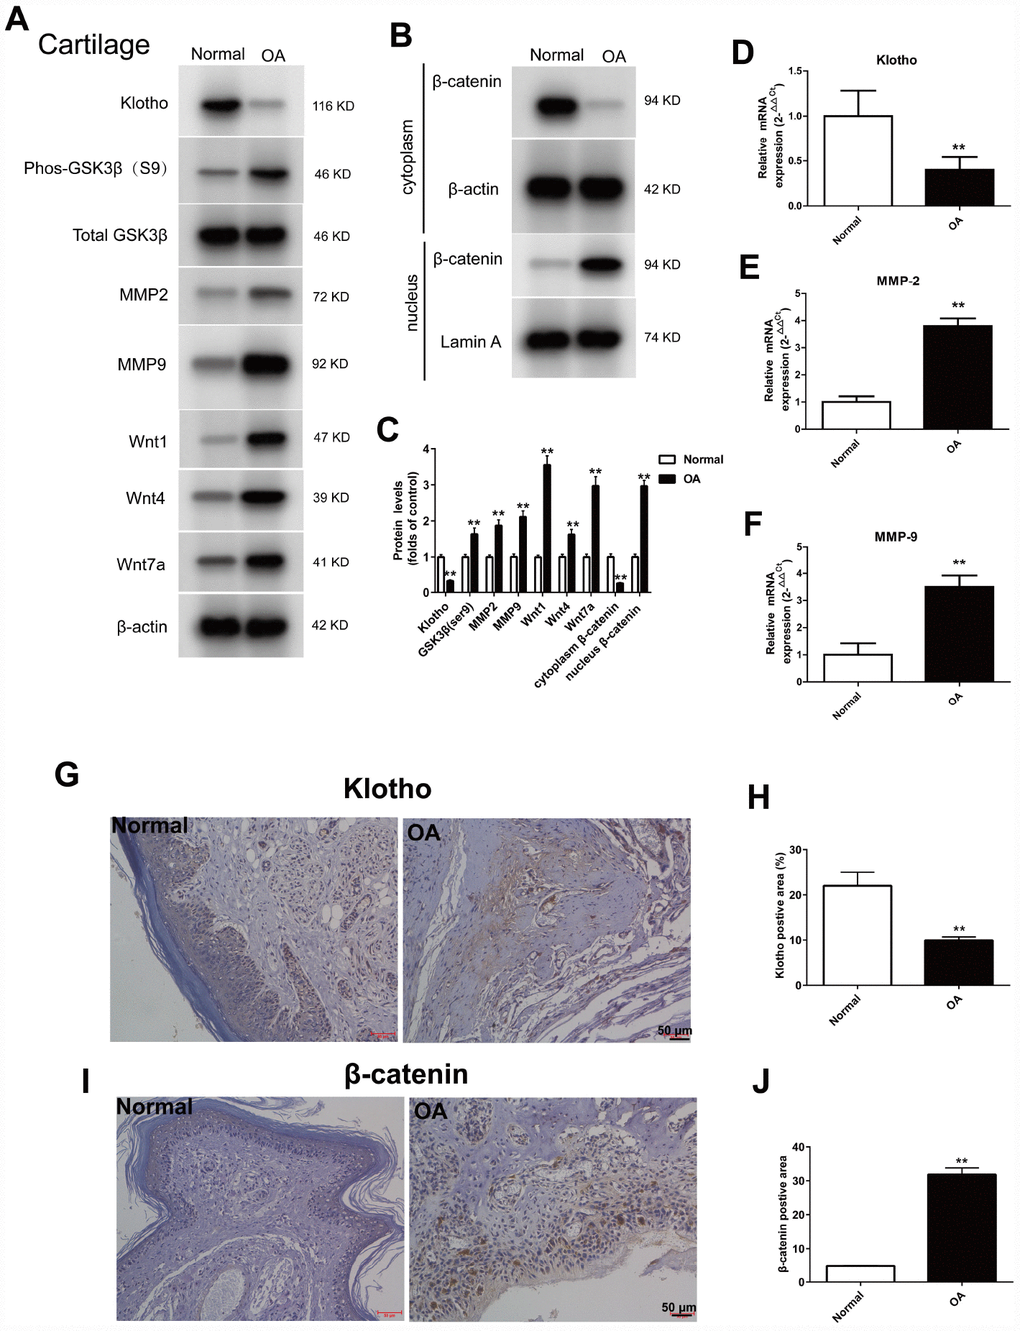 Up-regulation of Wnt signaling and down-regulation of Klotho in the joint after injury. ACLT surgery was used to induce OA in adult male C57/6J mice. Expression of Klotho, Phos-GSK3β (S9), GSK3β, MMP2, MMP9, Wnt1, Wnt4, Wnt7a and β-catenin (cytoplasm/nucleus) in the mouse cartilage tissue. (A) Expression change of Klotho, Phos-GSK3β (S9), GSK3β, MMP2, MMP9, Wnt1, Wnt4, Wnt7a, and (B) β-catenin in the cytoplasm and nucleus by Western Blot after modeling. (C) Protein levels of Klotho, Phos-GSK3β (S9), GSK3β, MMP2, MMP9, Wnt1, Wnt4, Wnt7a and β-catenin were detected by western blotting. Protein/β-actin and Protein/Lamin A were used to demonstrate the protein fold changes. (D) Klotho mRNA expression was assessed in the cartilage at 12 weeks after ACLT or control. (F) The expression of matrix-degrading enzyme genes, MMP-2 (E), MMP-9 (F) were evaluated by Real-Time PCR. (G–J) The expression of Klotho protein and β-catenin protein in the control group and OA group were compared by immunohistochemistry,. Scale bar, 50 mm. Data are the mean ±SD, n=8 mice. *P 